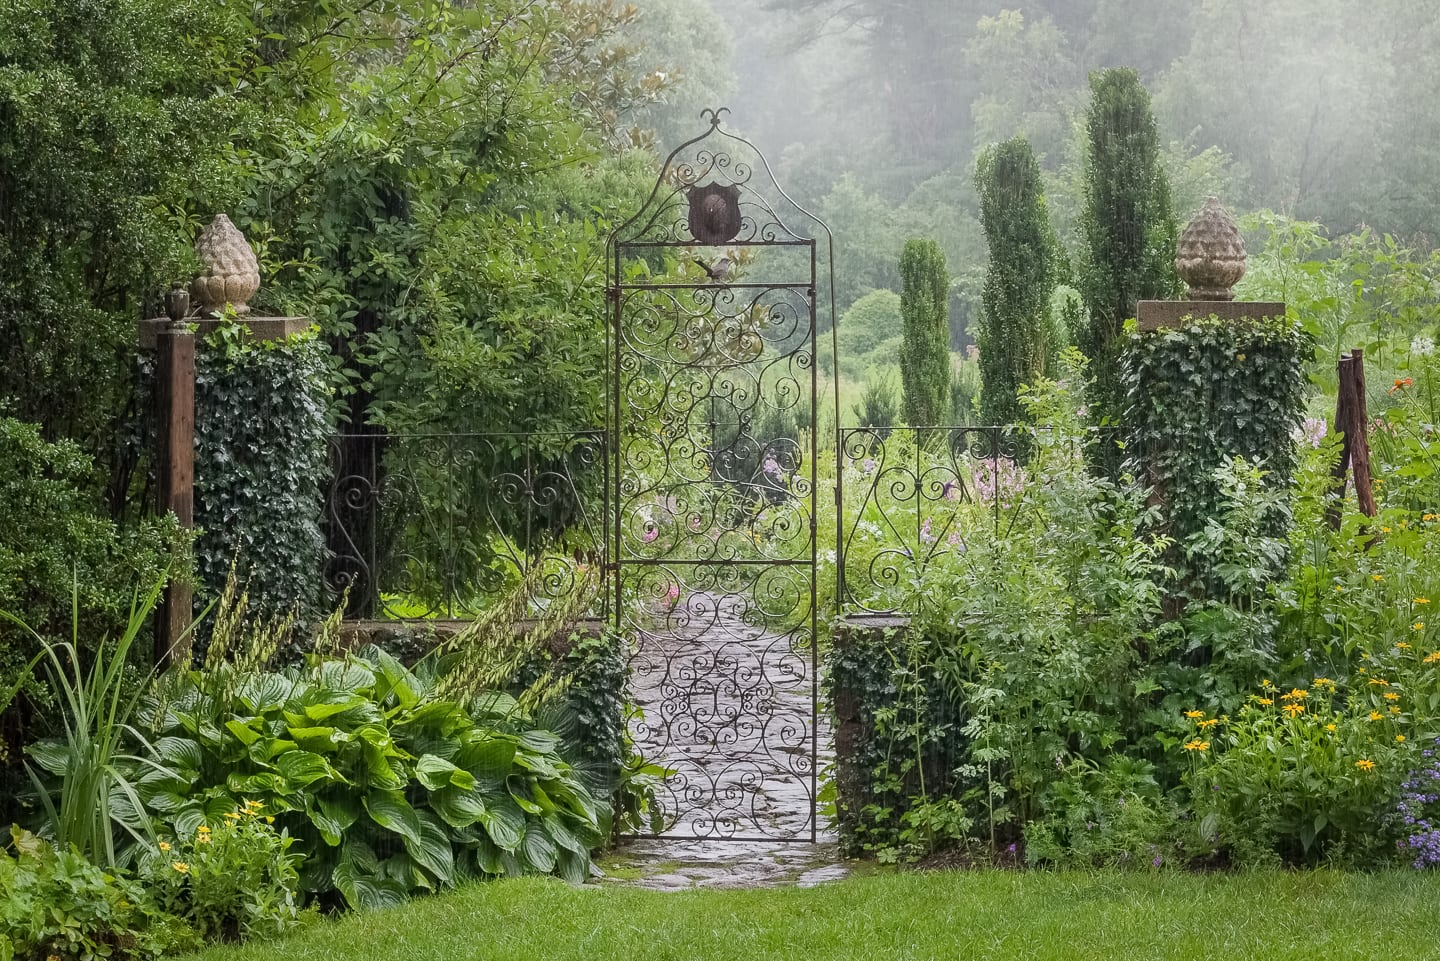 A garden gate in front of a stone path on a rainy day.